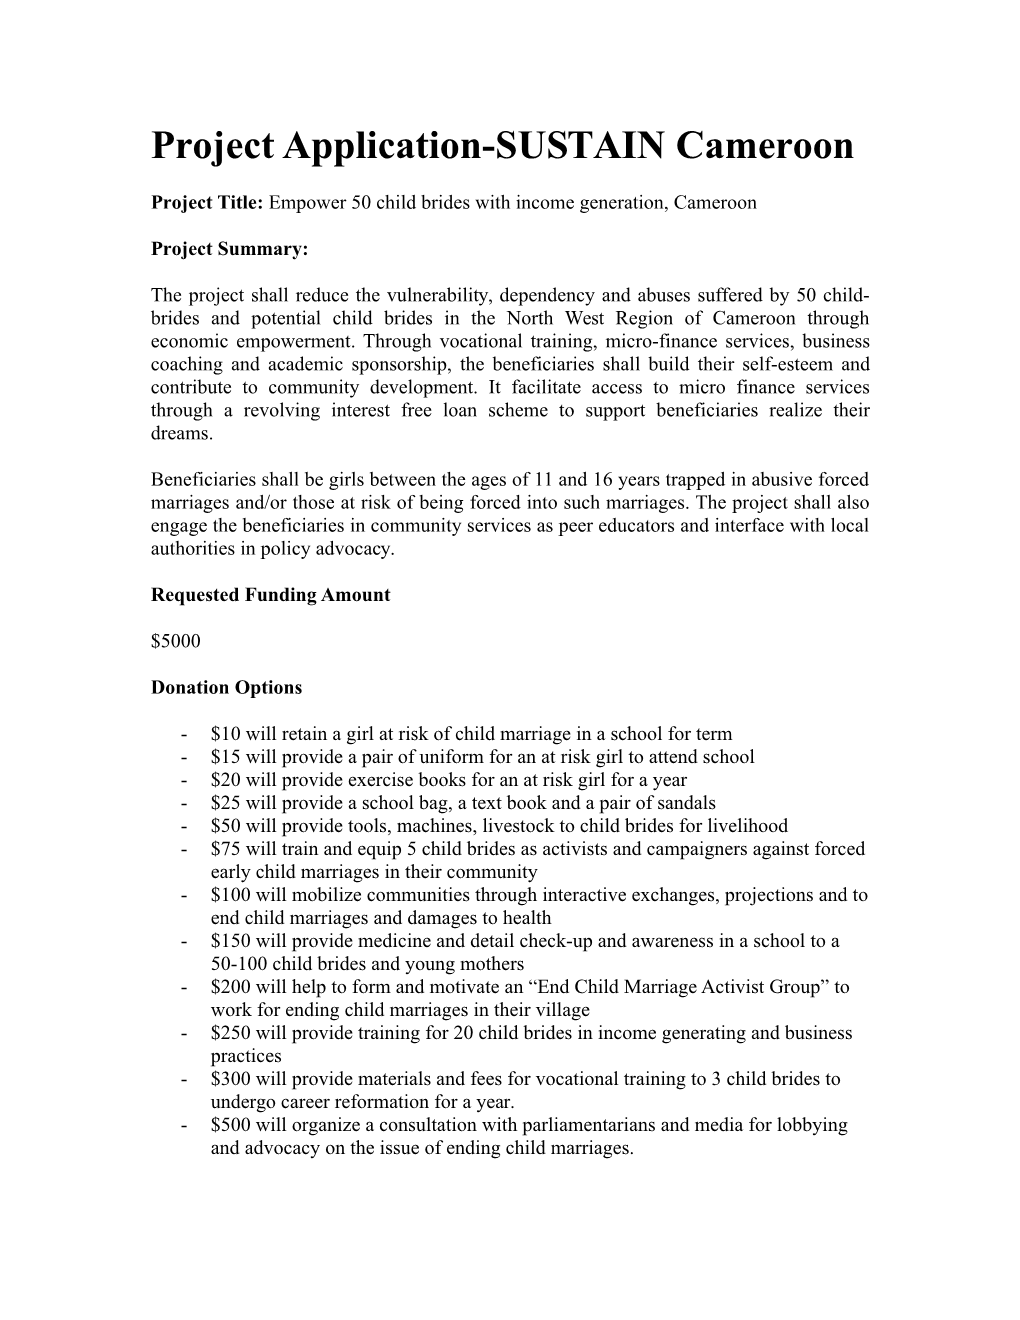 Project Application-SUSTAIN Cameroon